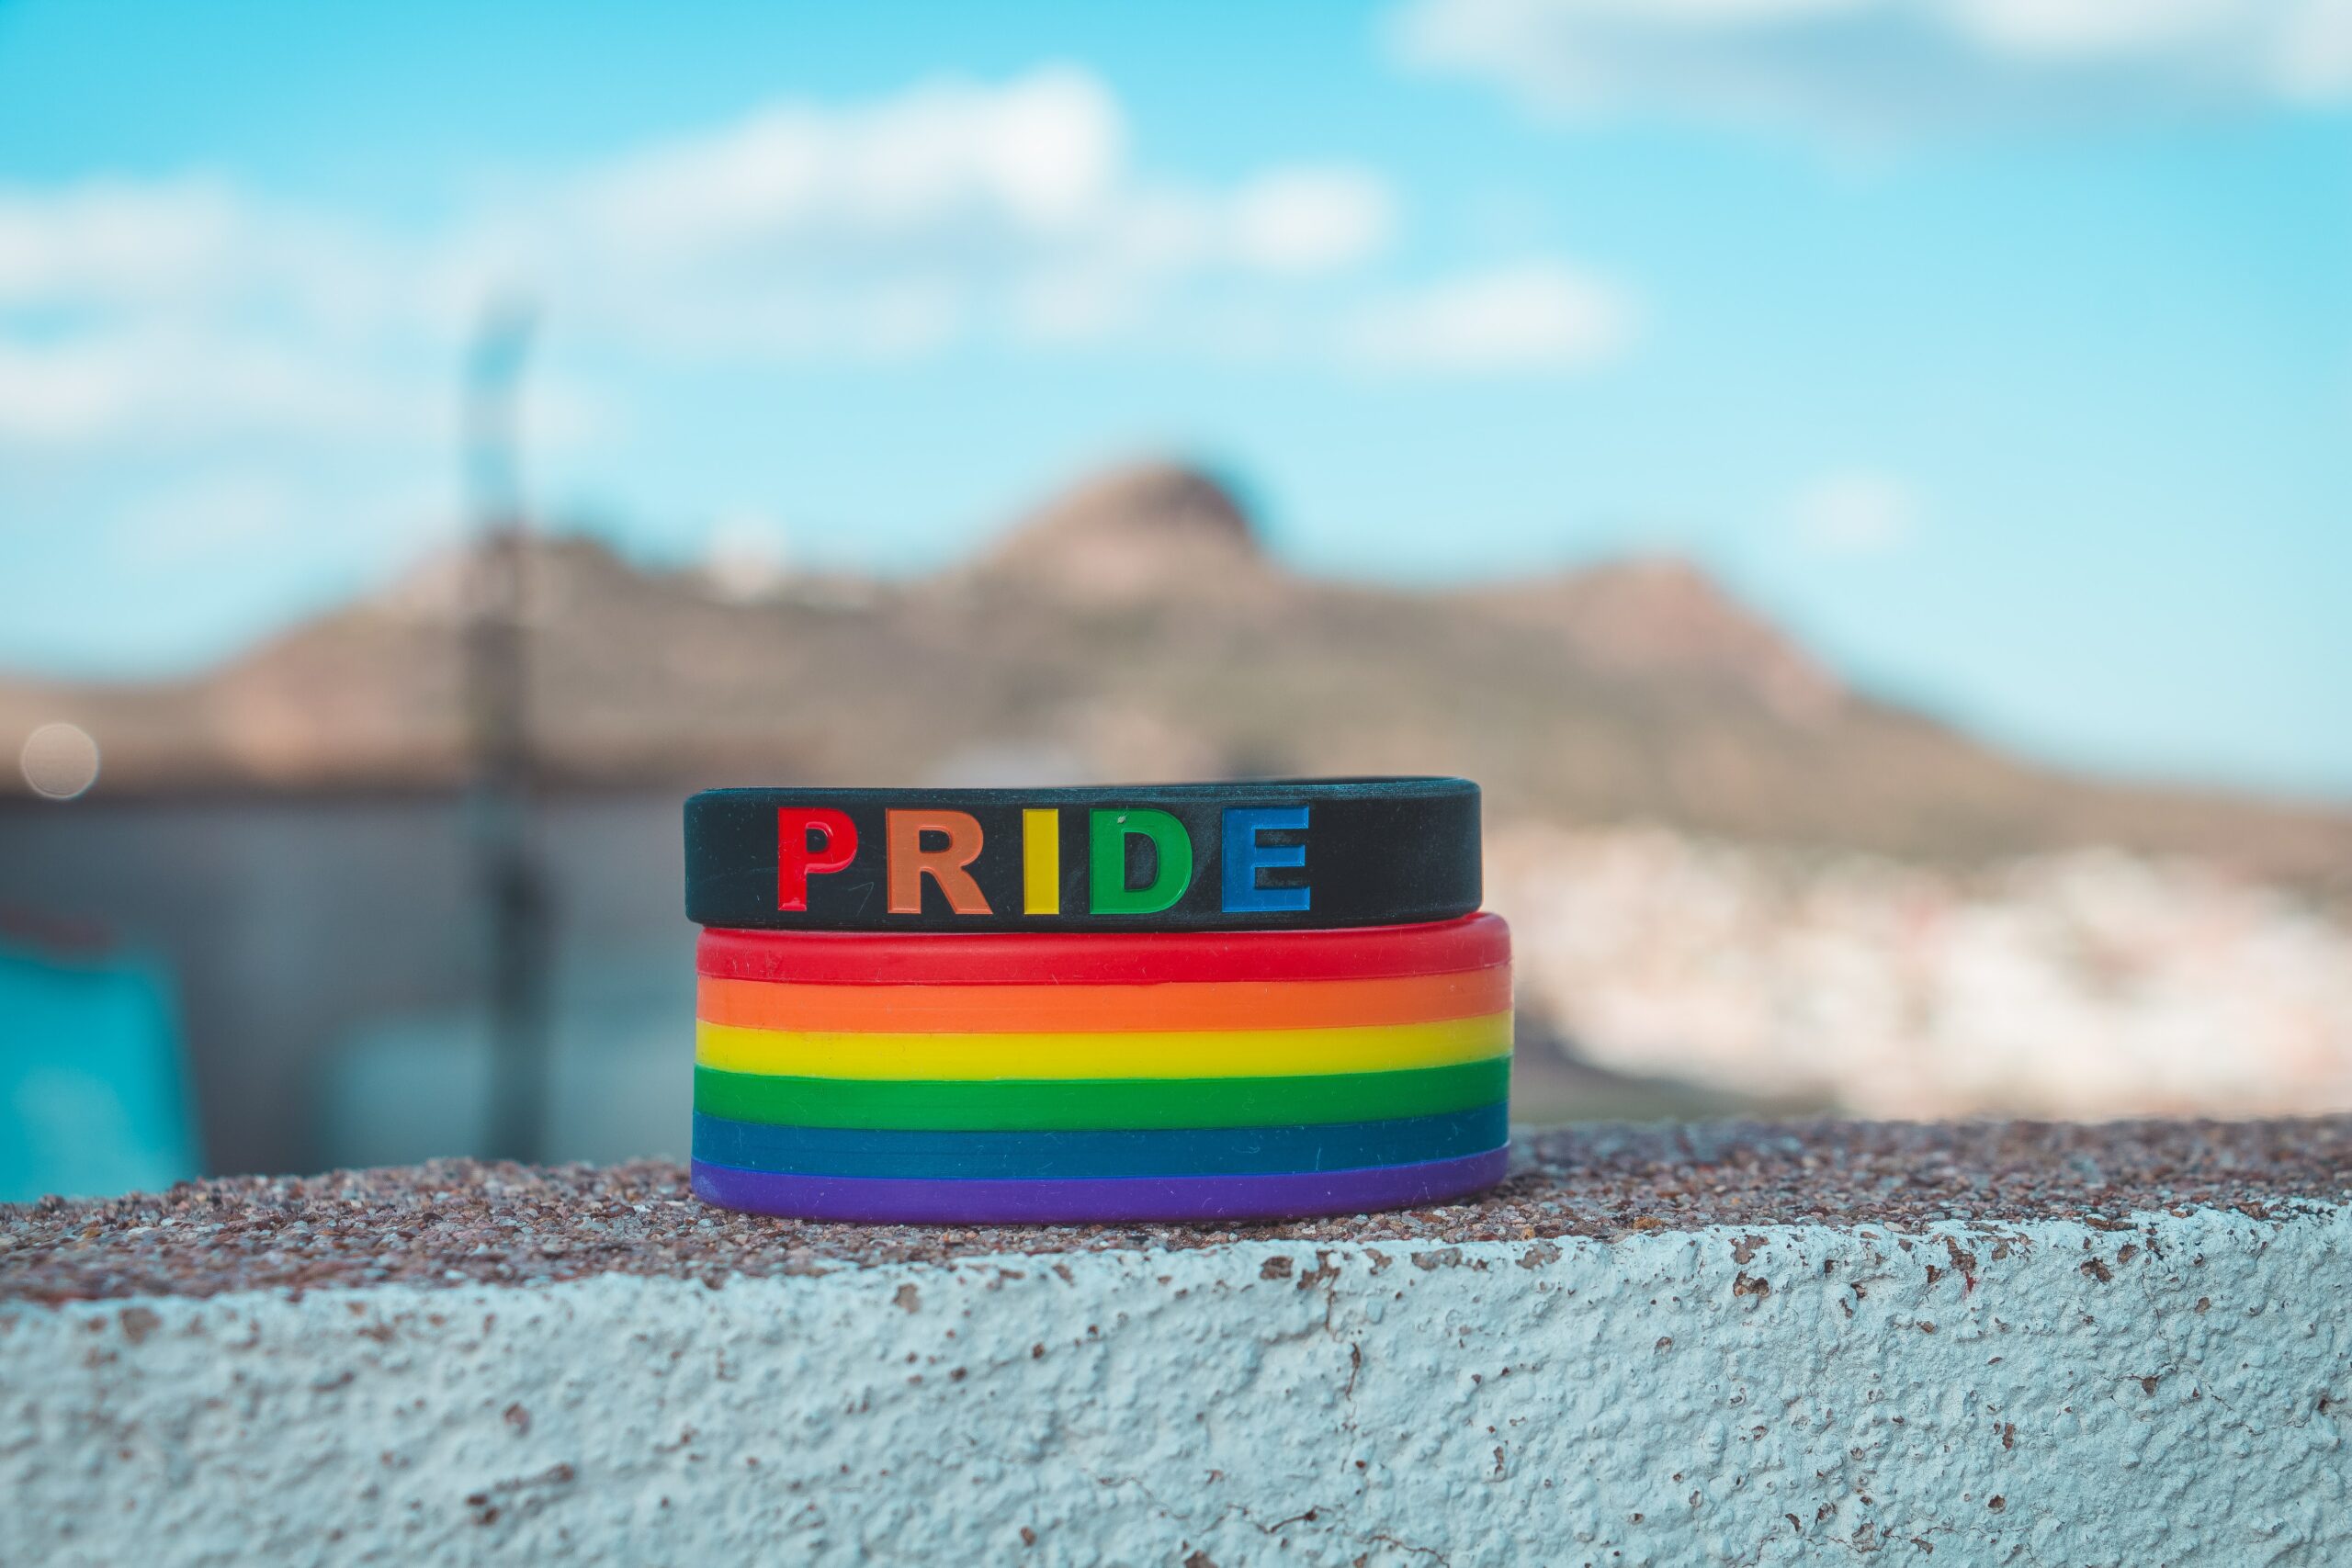 Piece of Pride: Notable LGBTQ Figures in the Cannabis Industry